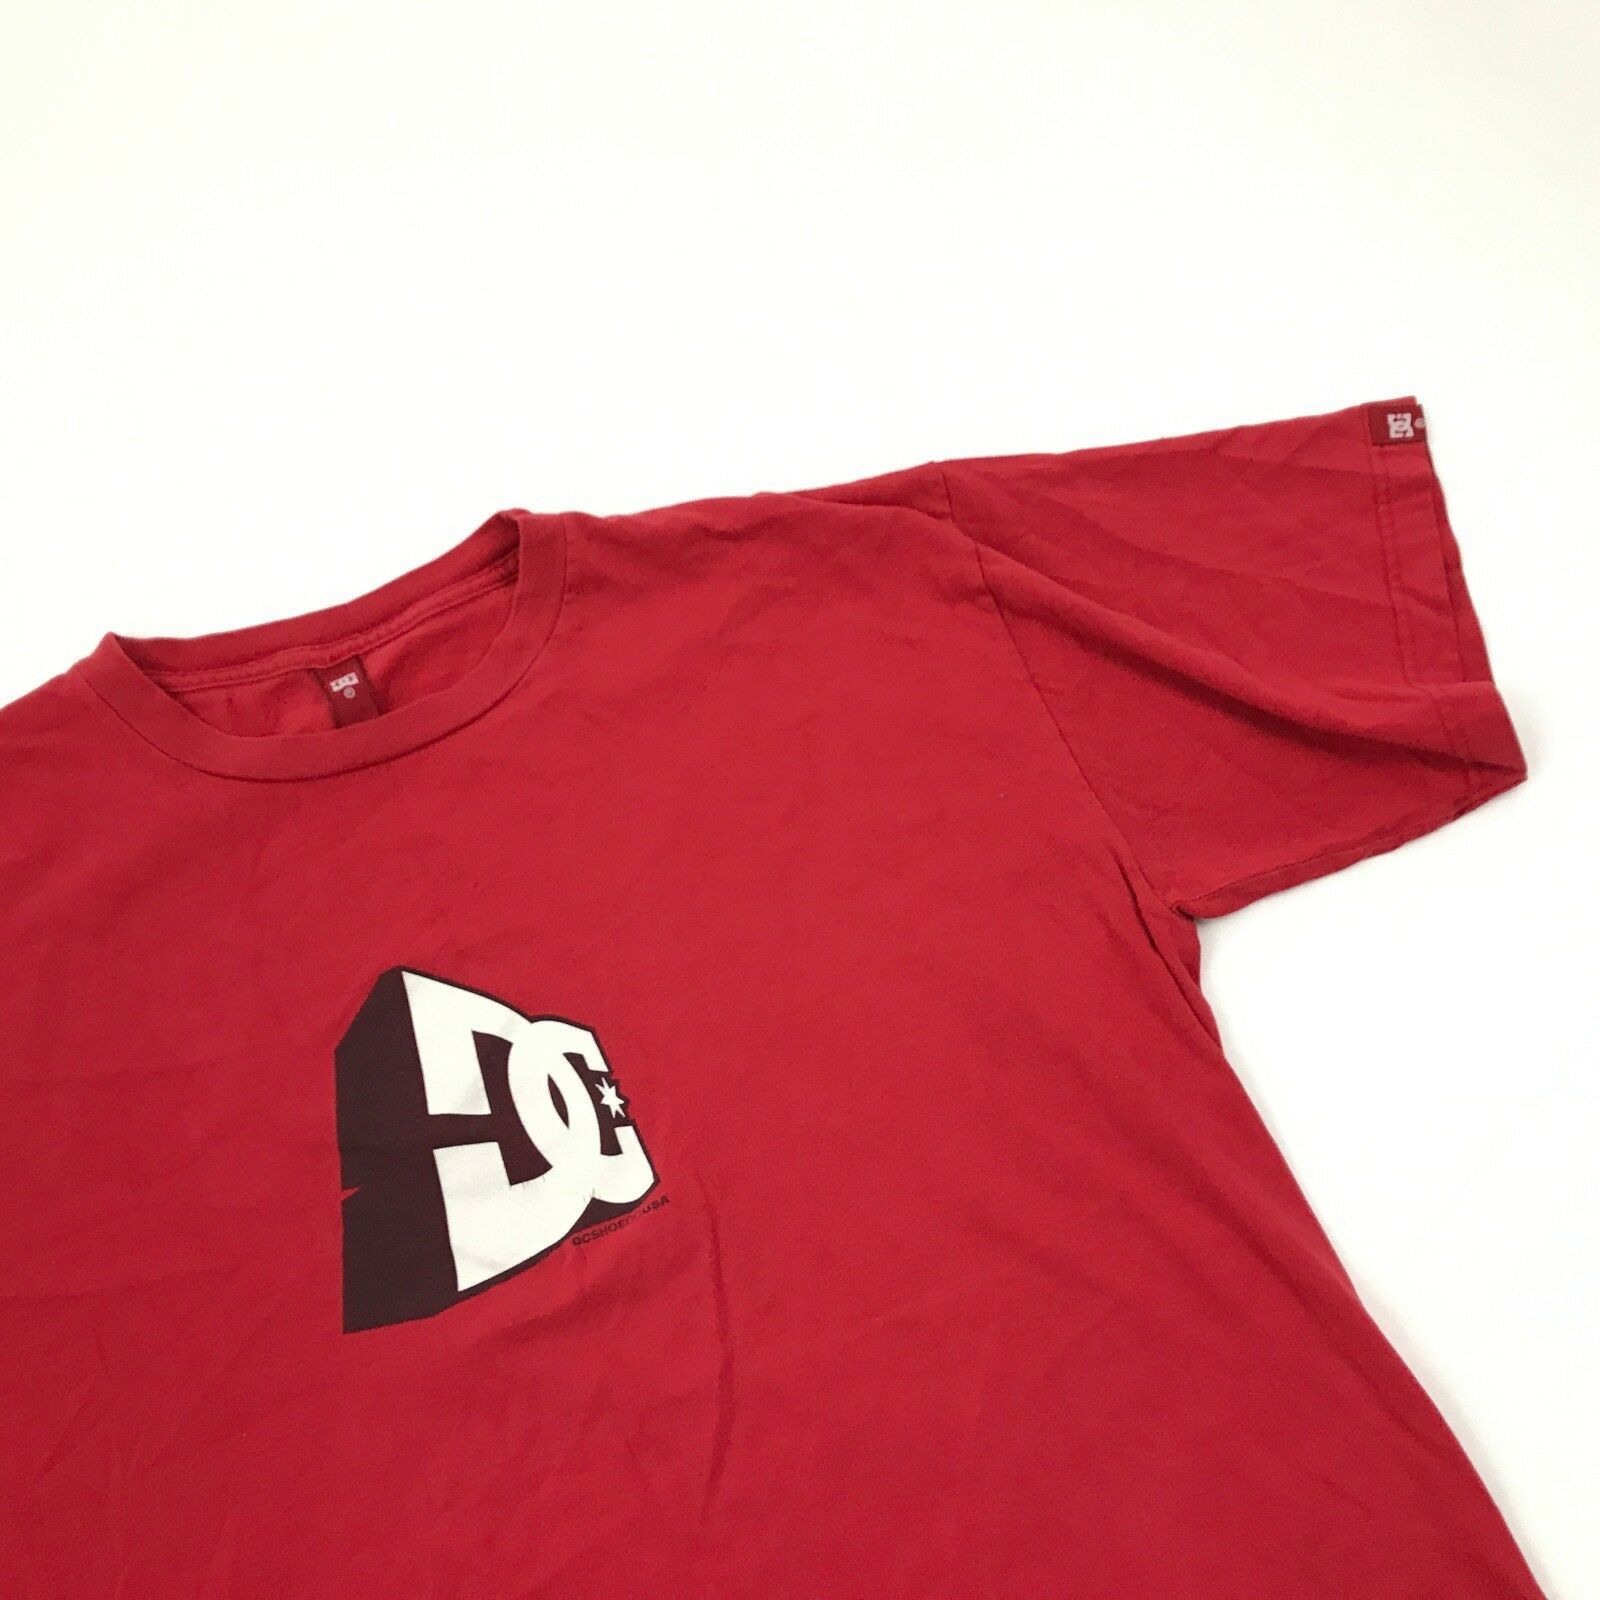 DC Shoes Red Baggy Shirt Adult Size Large Oversize Skate Tee Street ...